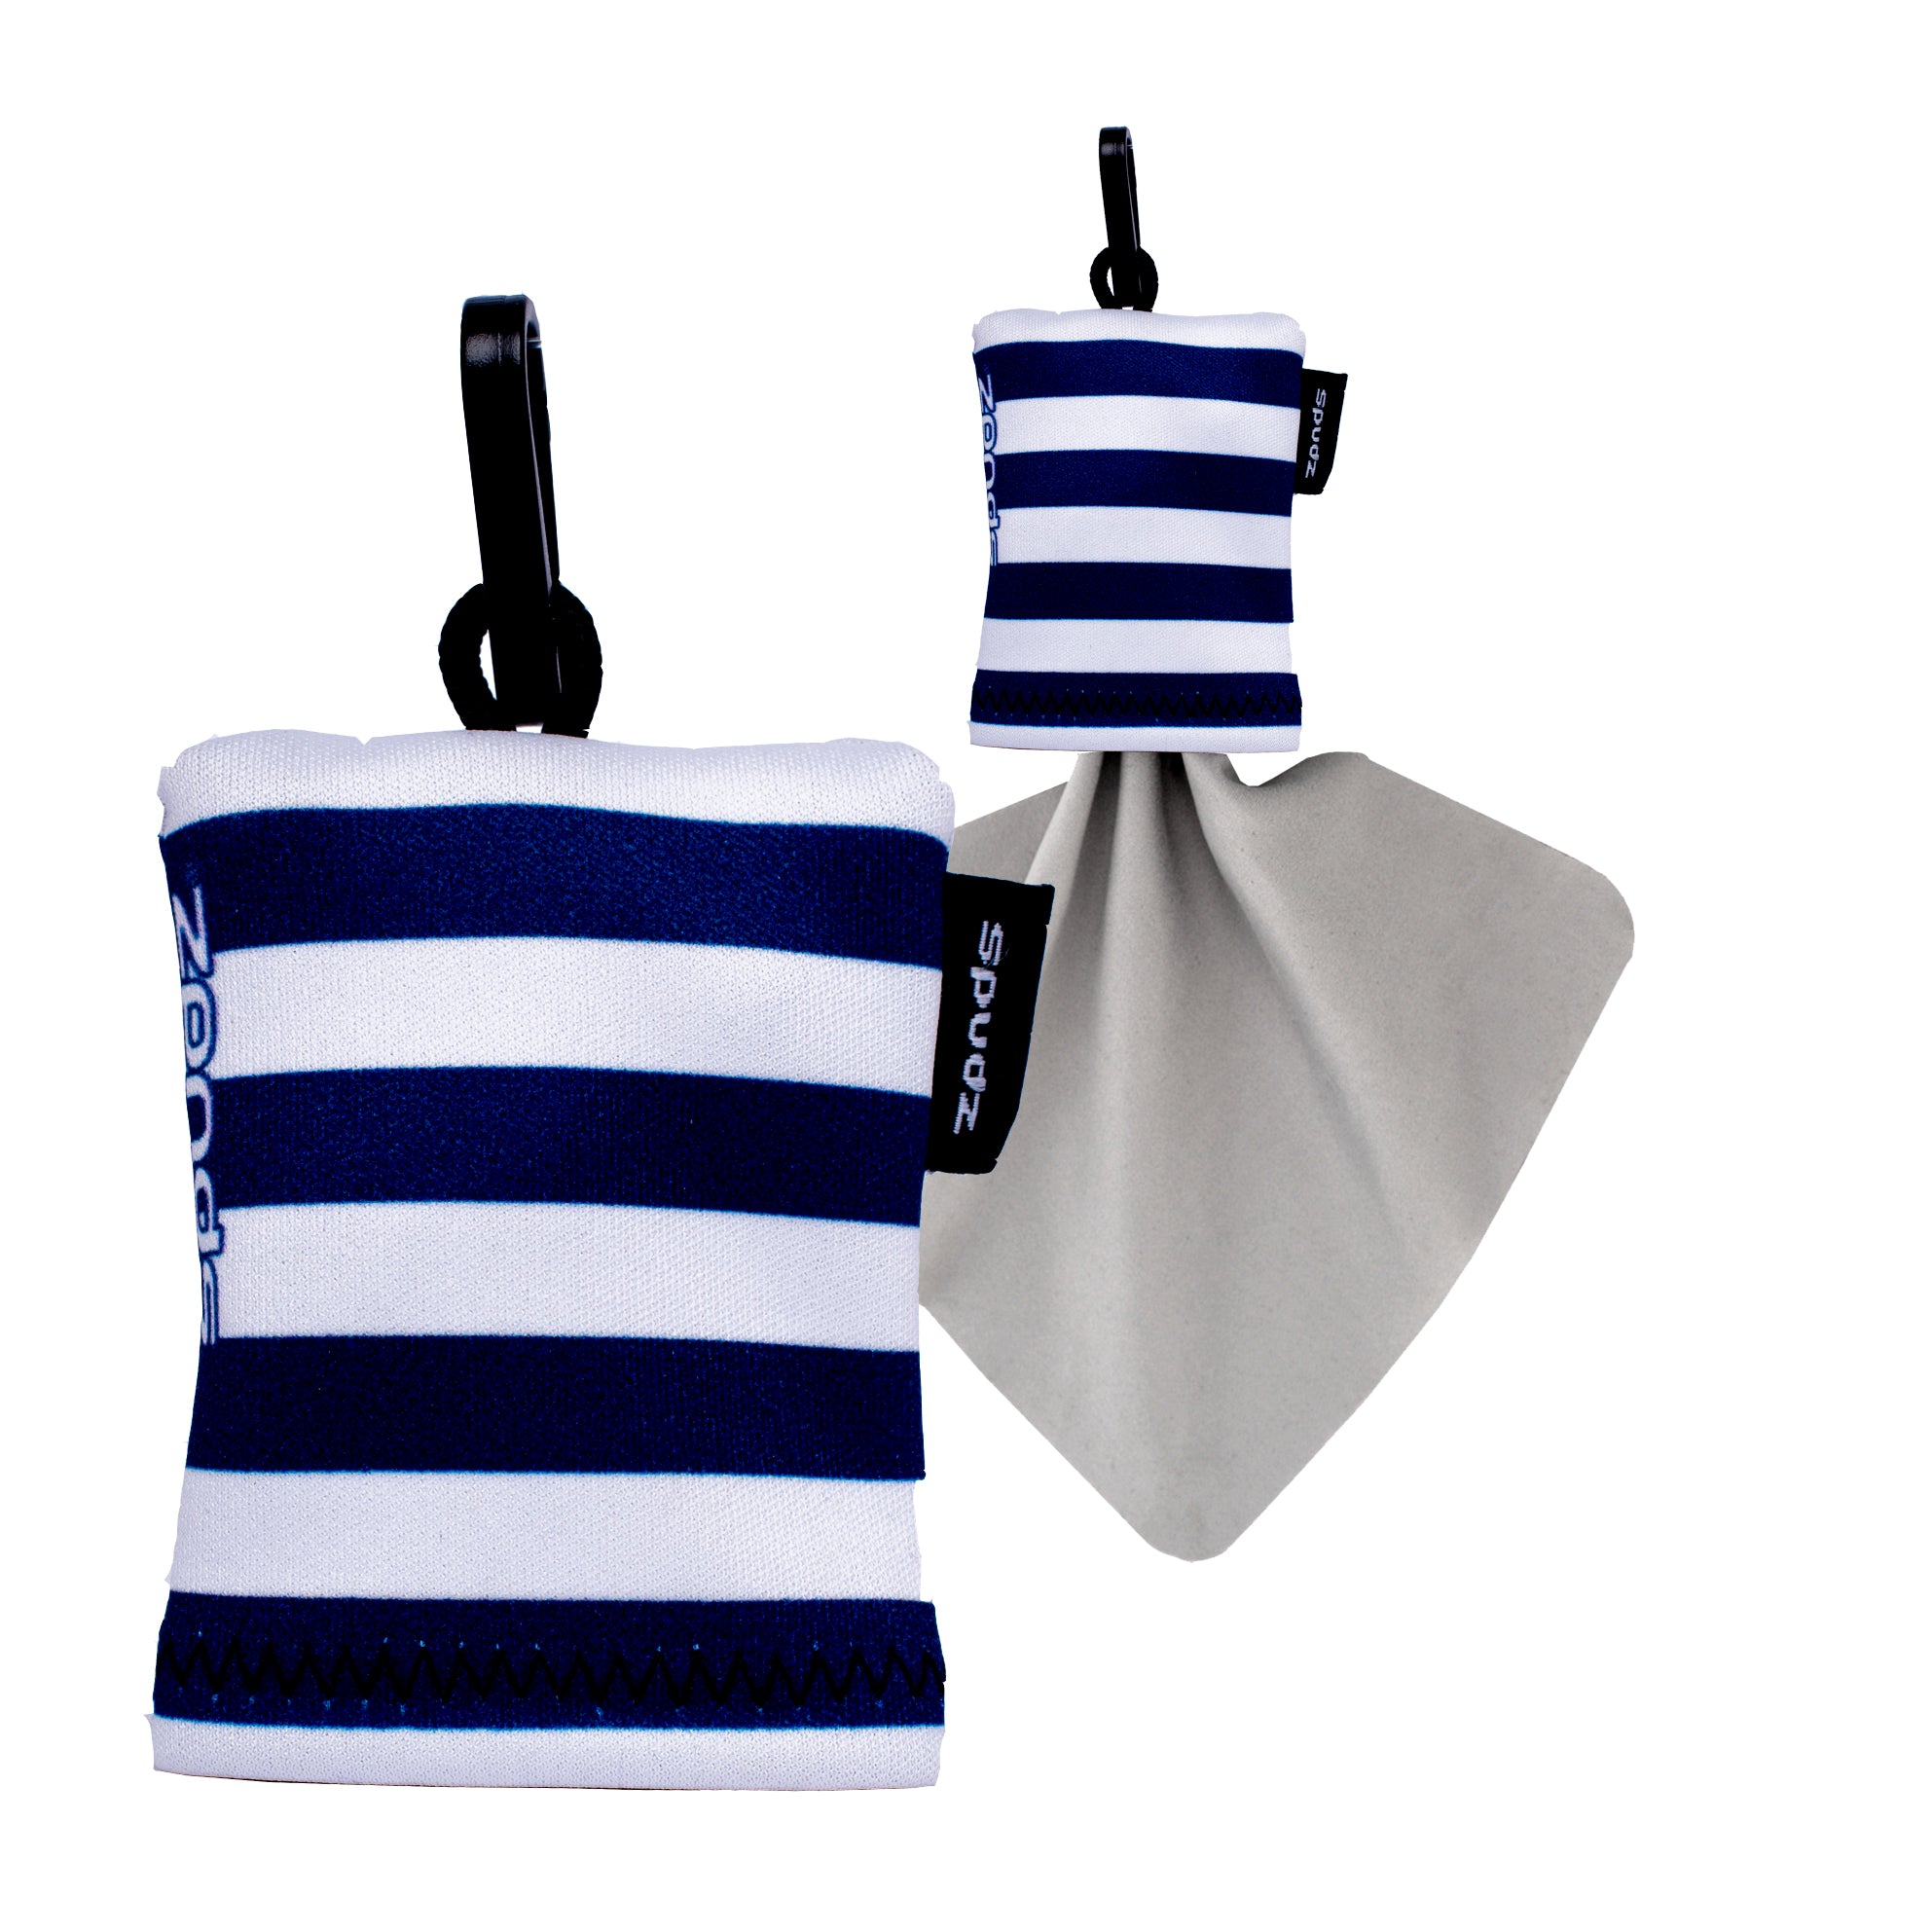 10 x 10 Classic Lens Cloth In Pouch (Stripes)